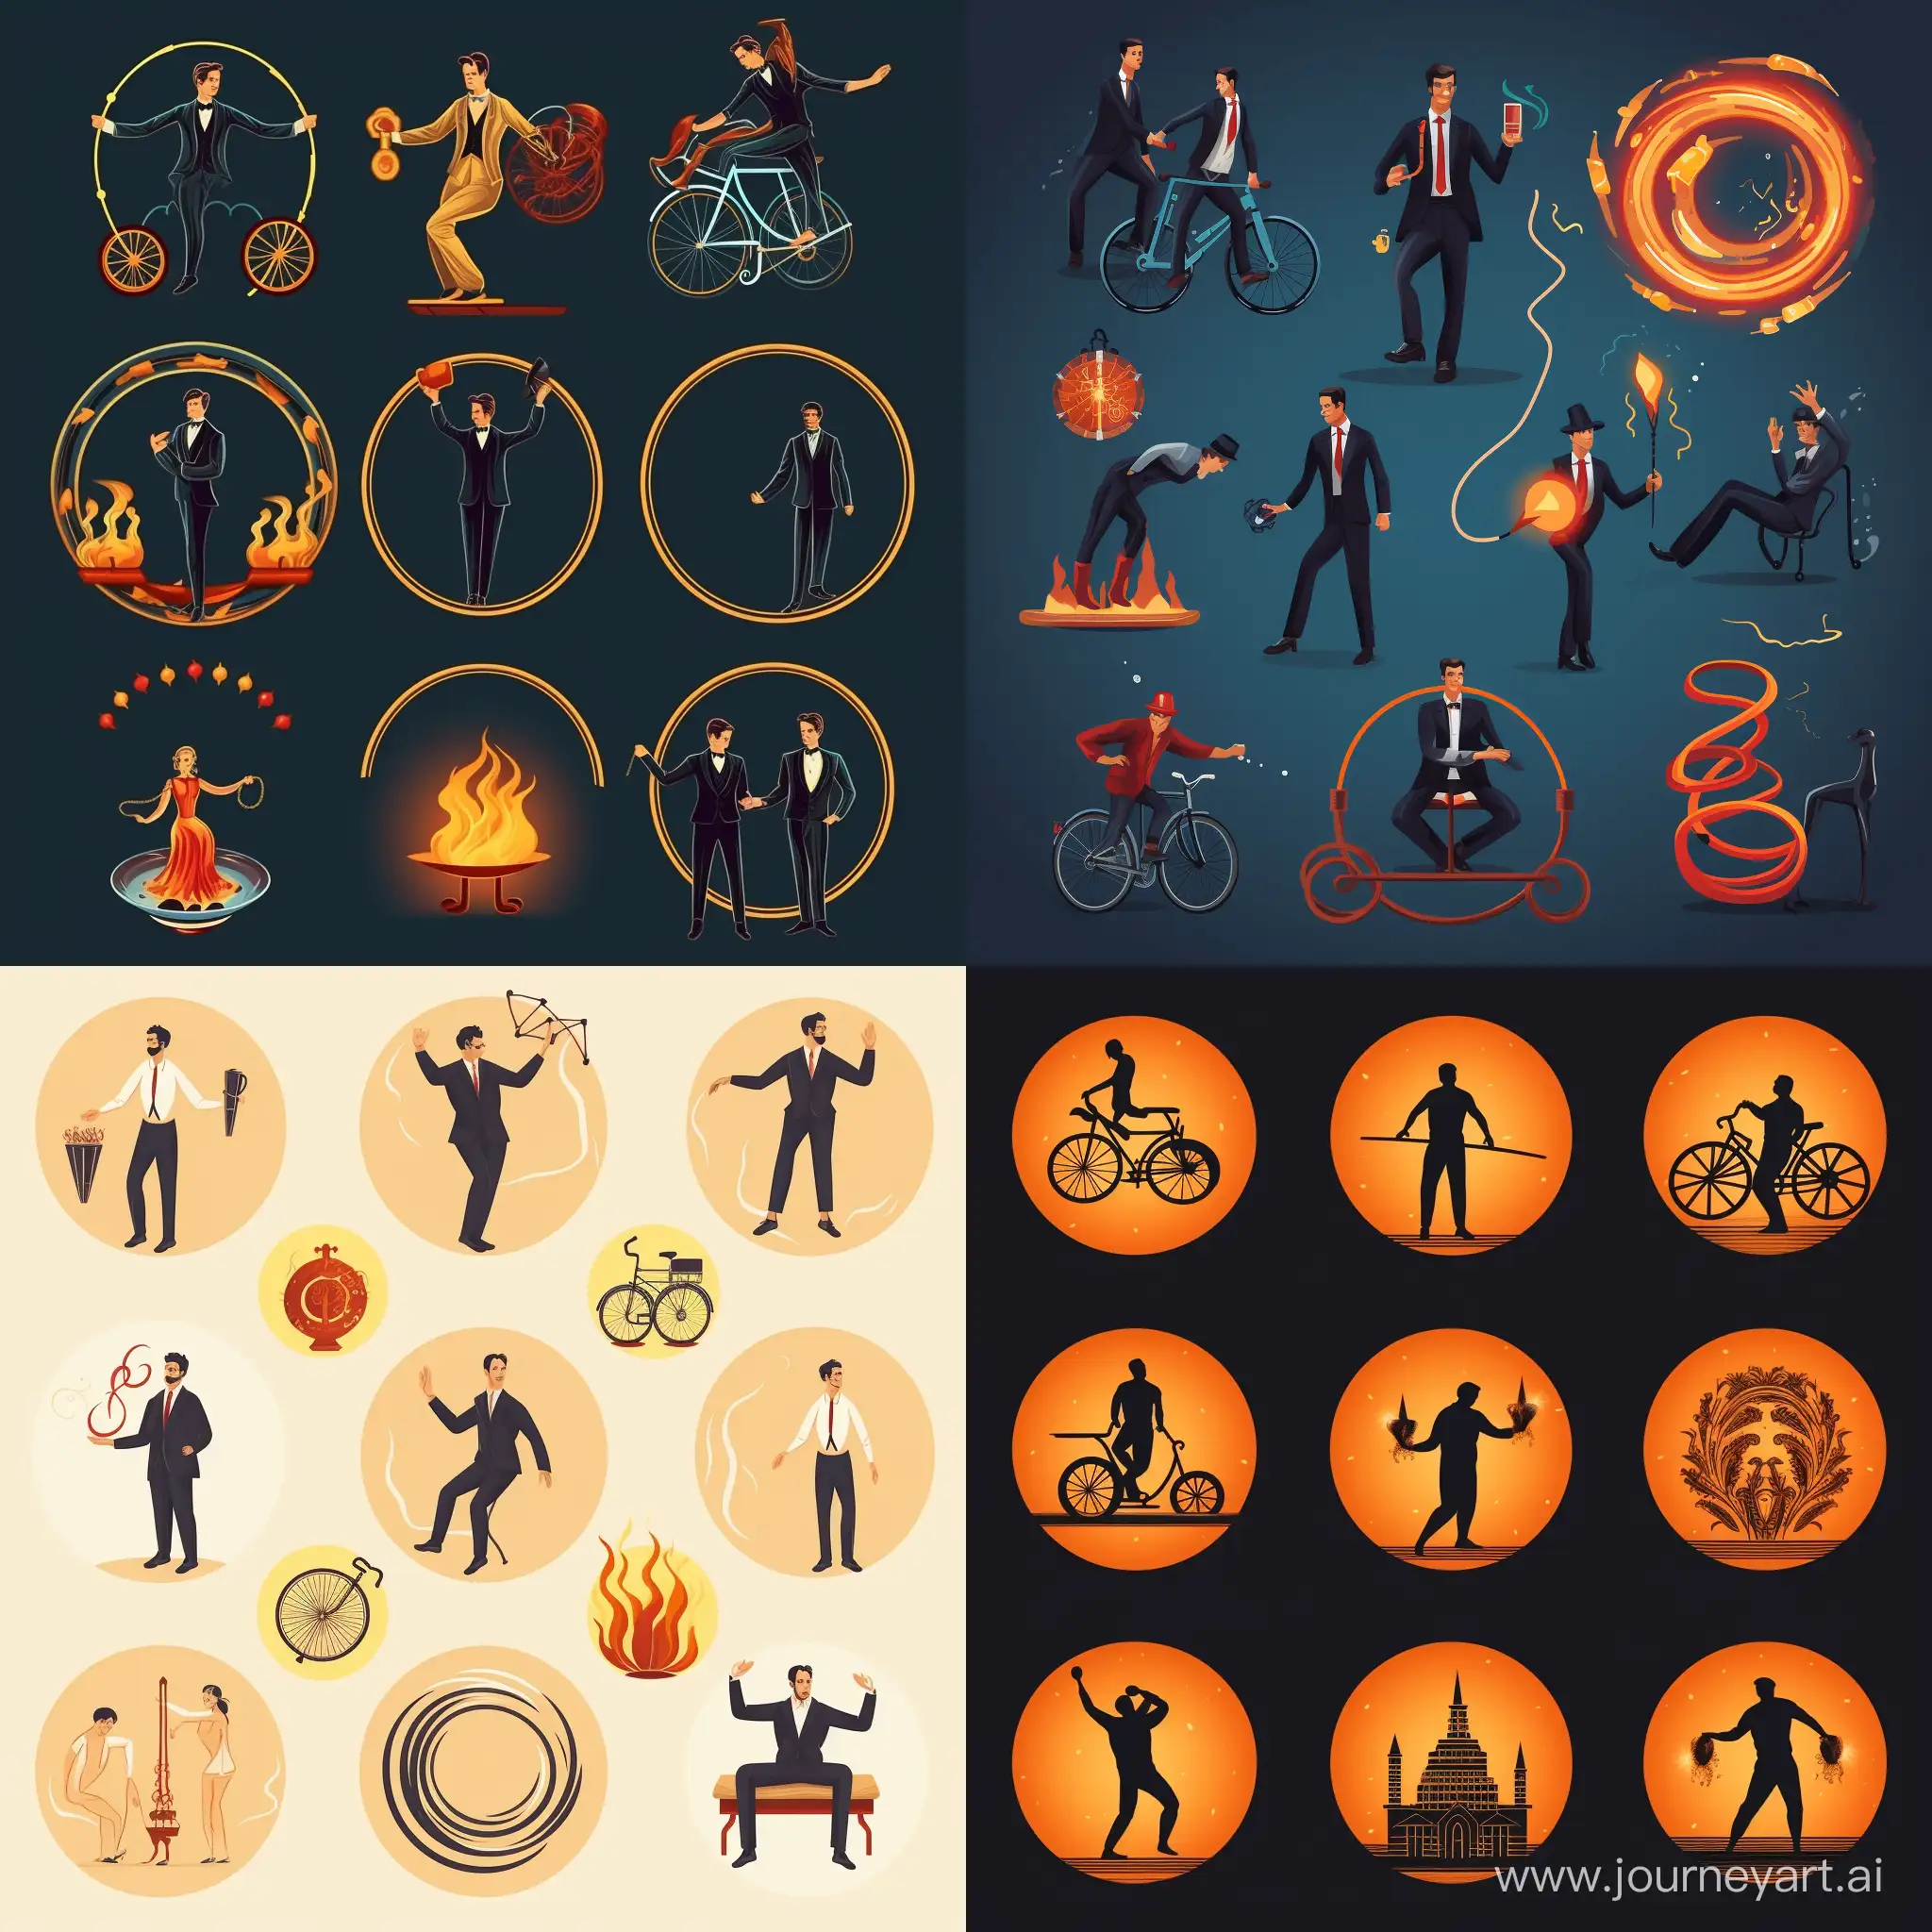 icons: man on unicycle. man with diabolo. man is juggling. man is balancing on cylinder. men and fire fans. man with poi.